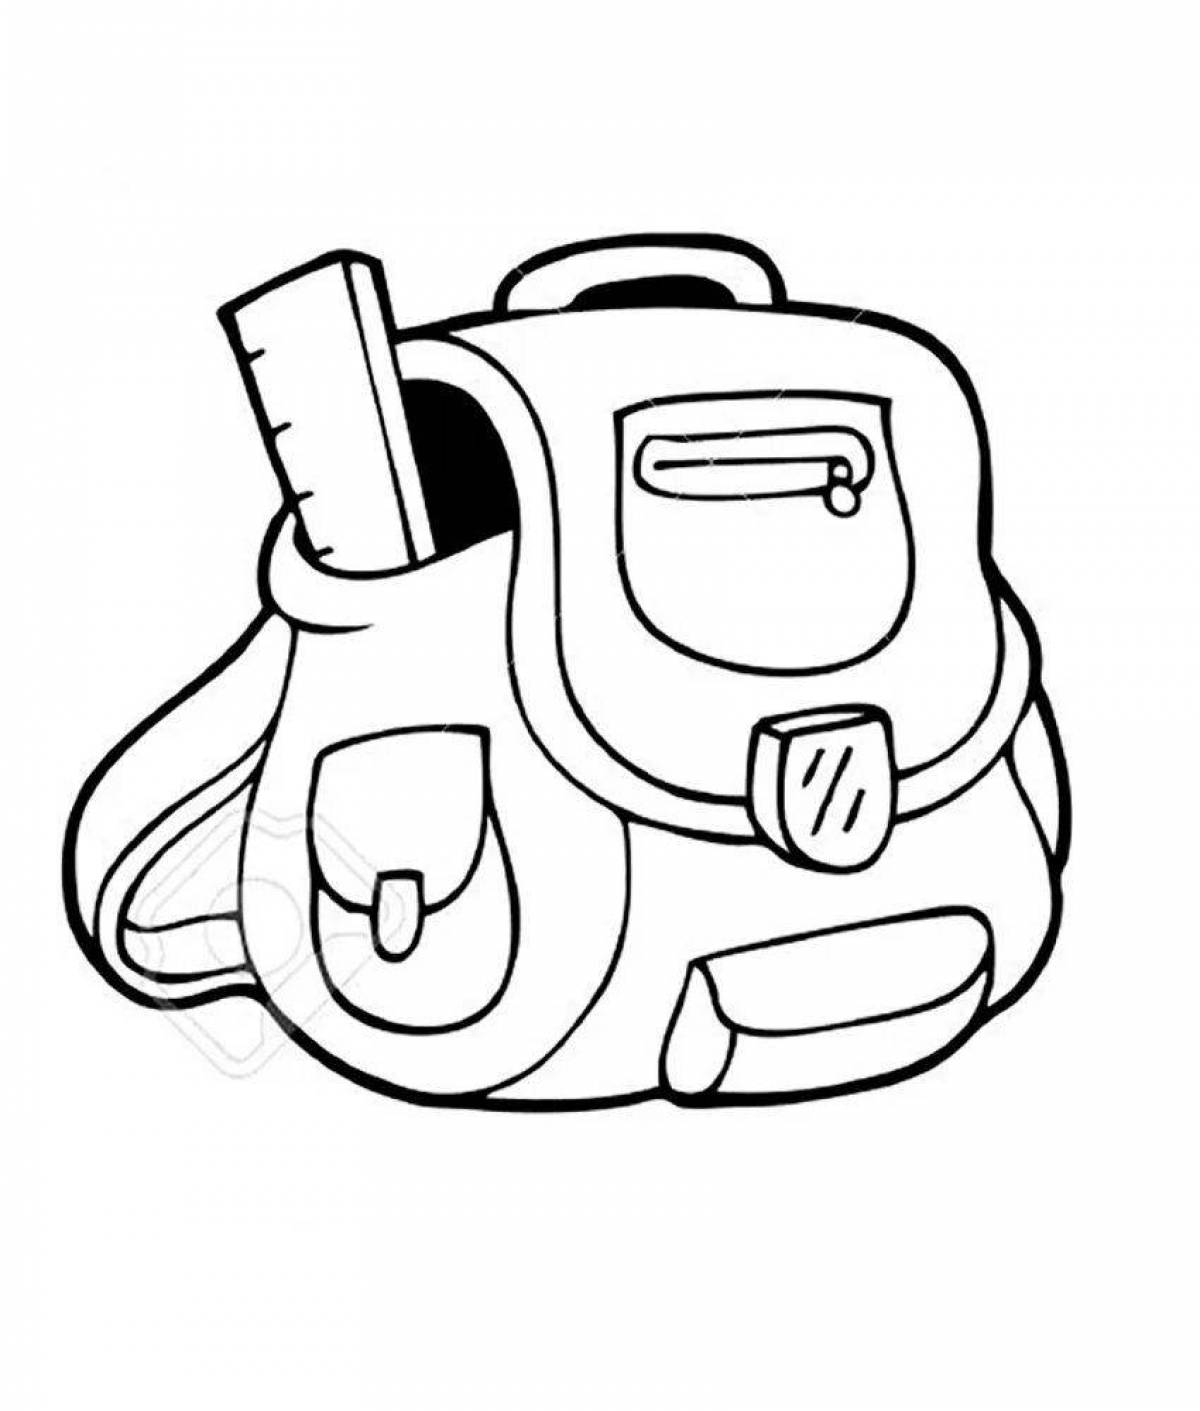 Brilliant youth briefcase coloring page